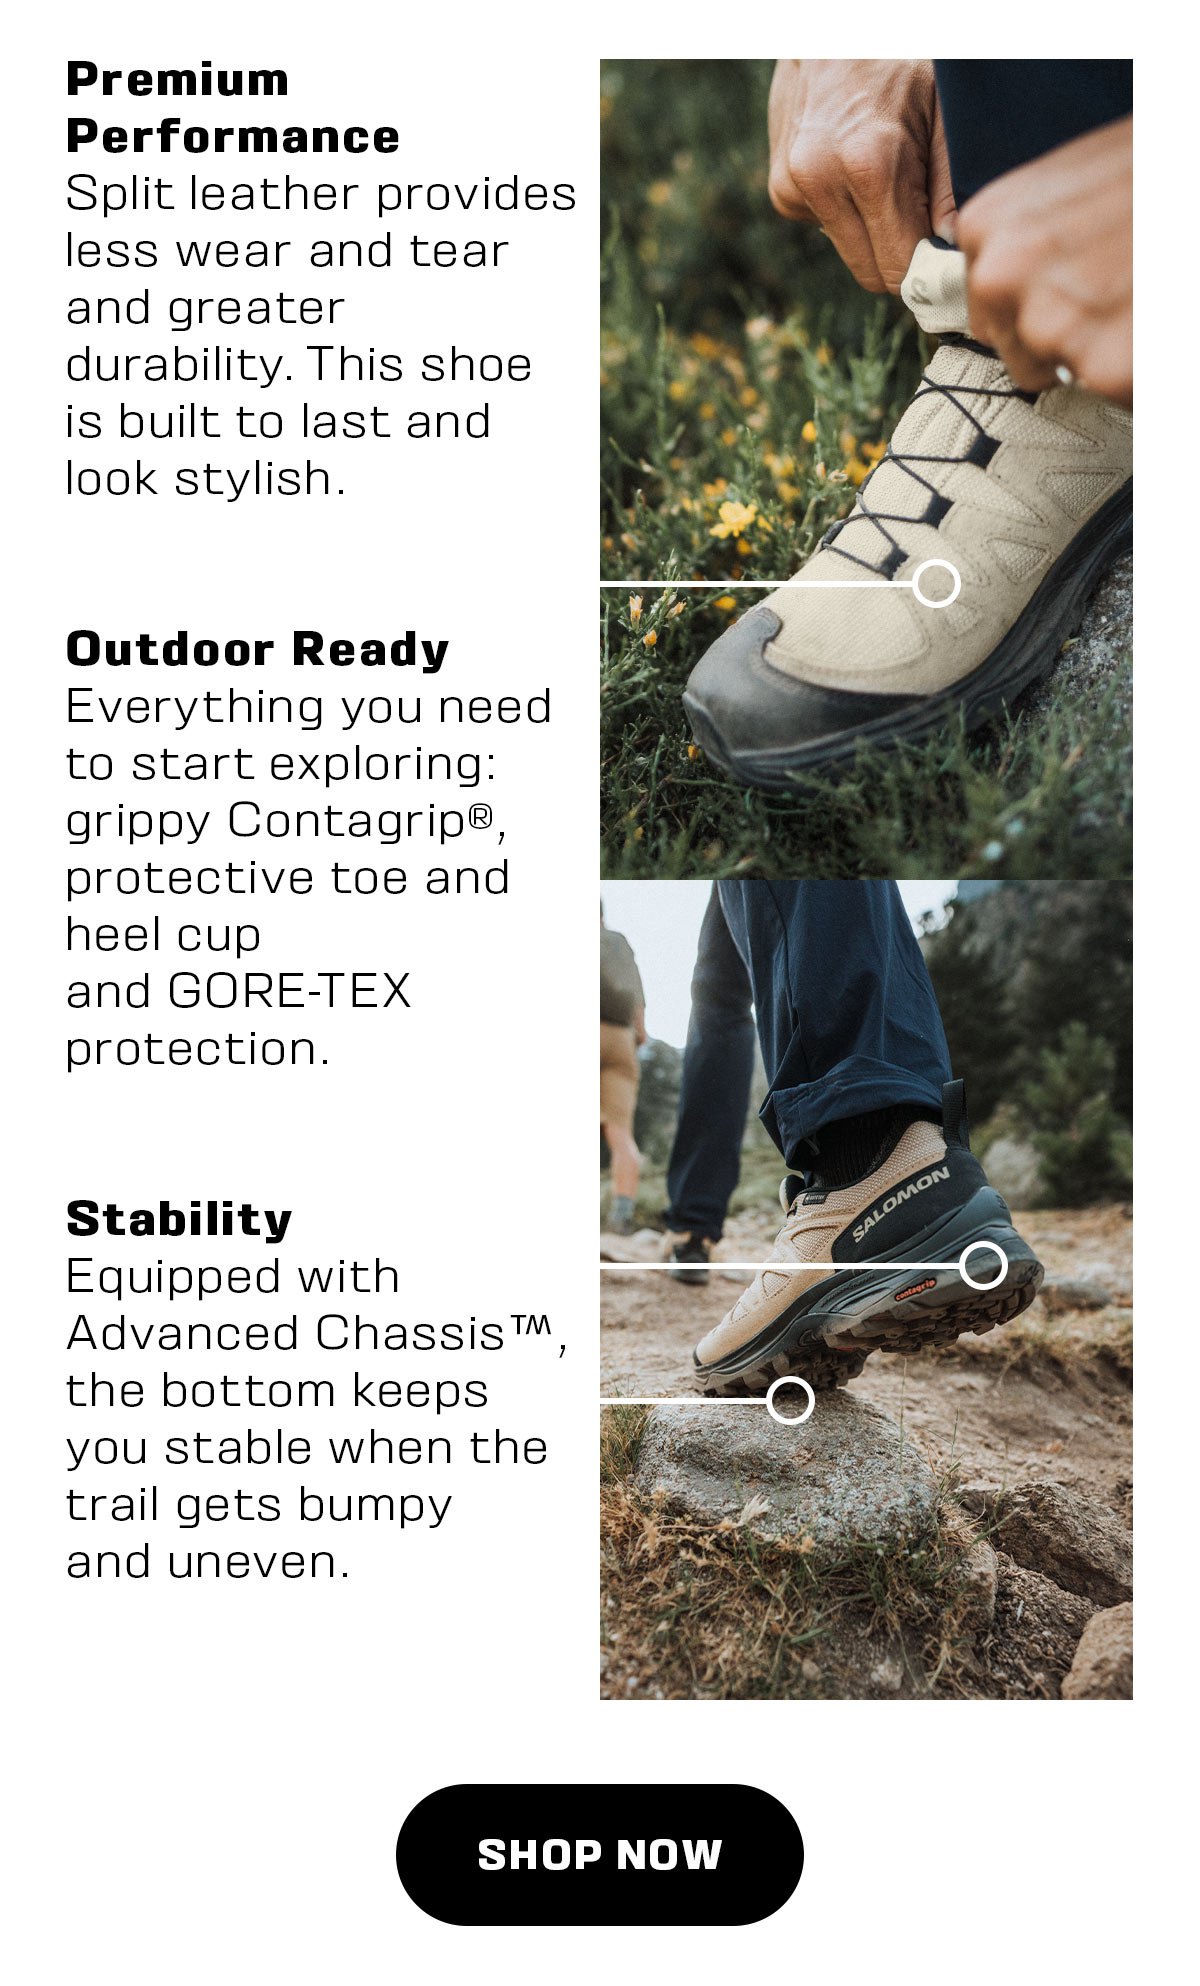 Premium Performance Split leather provides less wear and tear and greater durability. This shoe is built to last and look stylish. Outdoor Ready Everything you need to start exploring: grippy Contagrip, protective toe and heel cup and GORE-TEX protection. Stability Equipped with B Advanced Chassis, the bottom keeps you stable when the trail gets bumpy and uneven. 